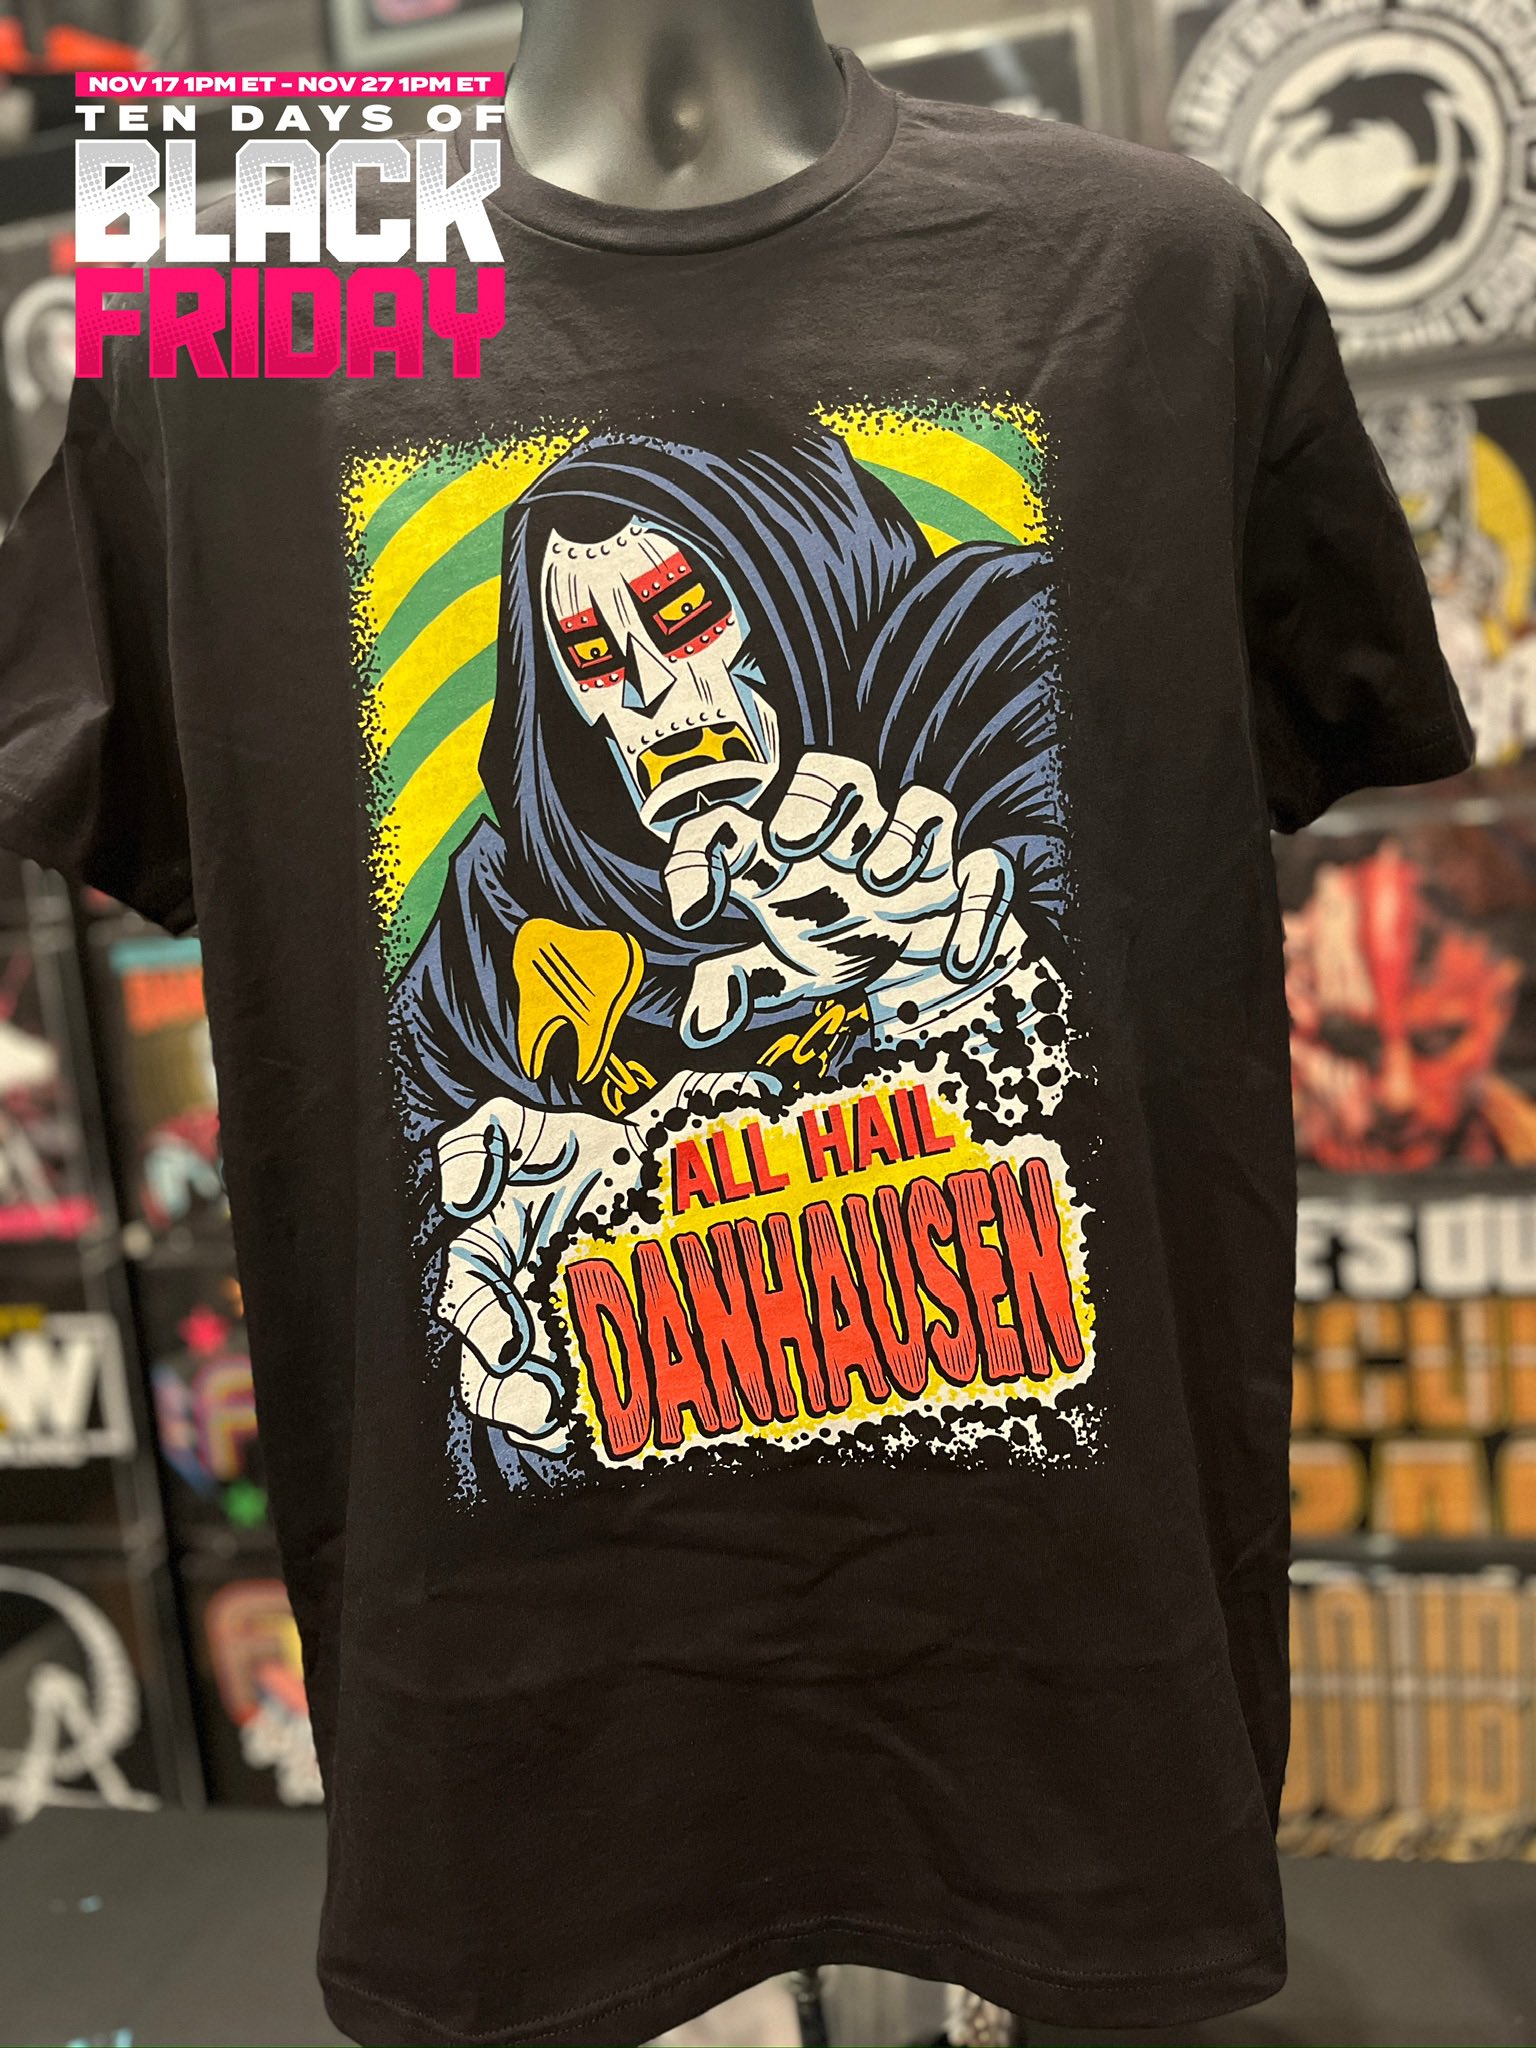 Pro Wrestling Tees on X: Lots of New Danhausen merch is available on his  PWT Store including the new “All Hail Danhausen” tee! Get it while it's on  discount during the Black